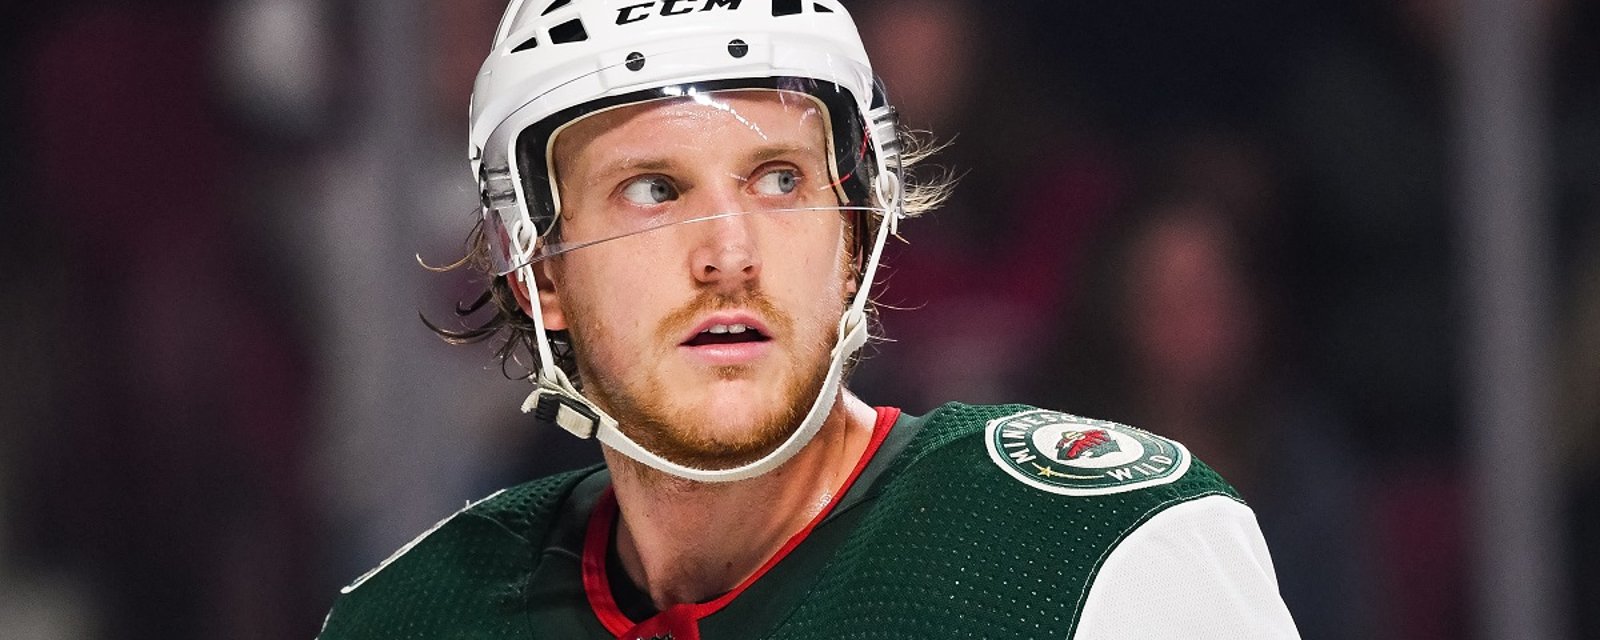 Jonas Brodin will miss “significant time” due to injury.